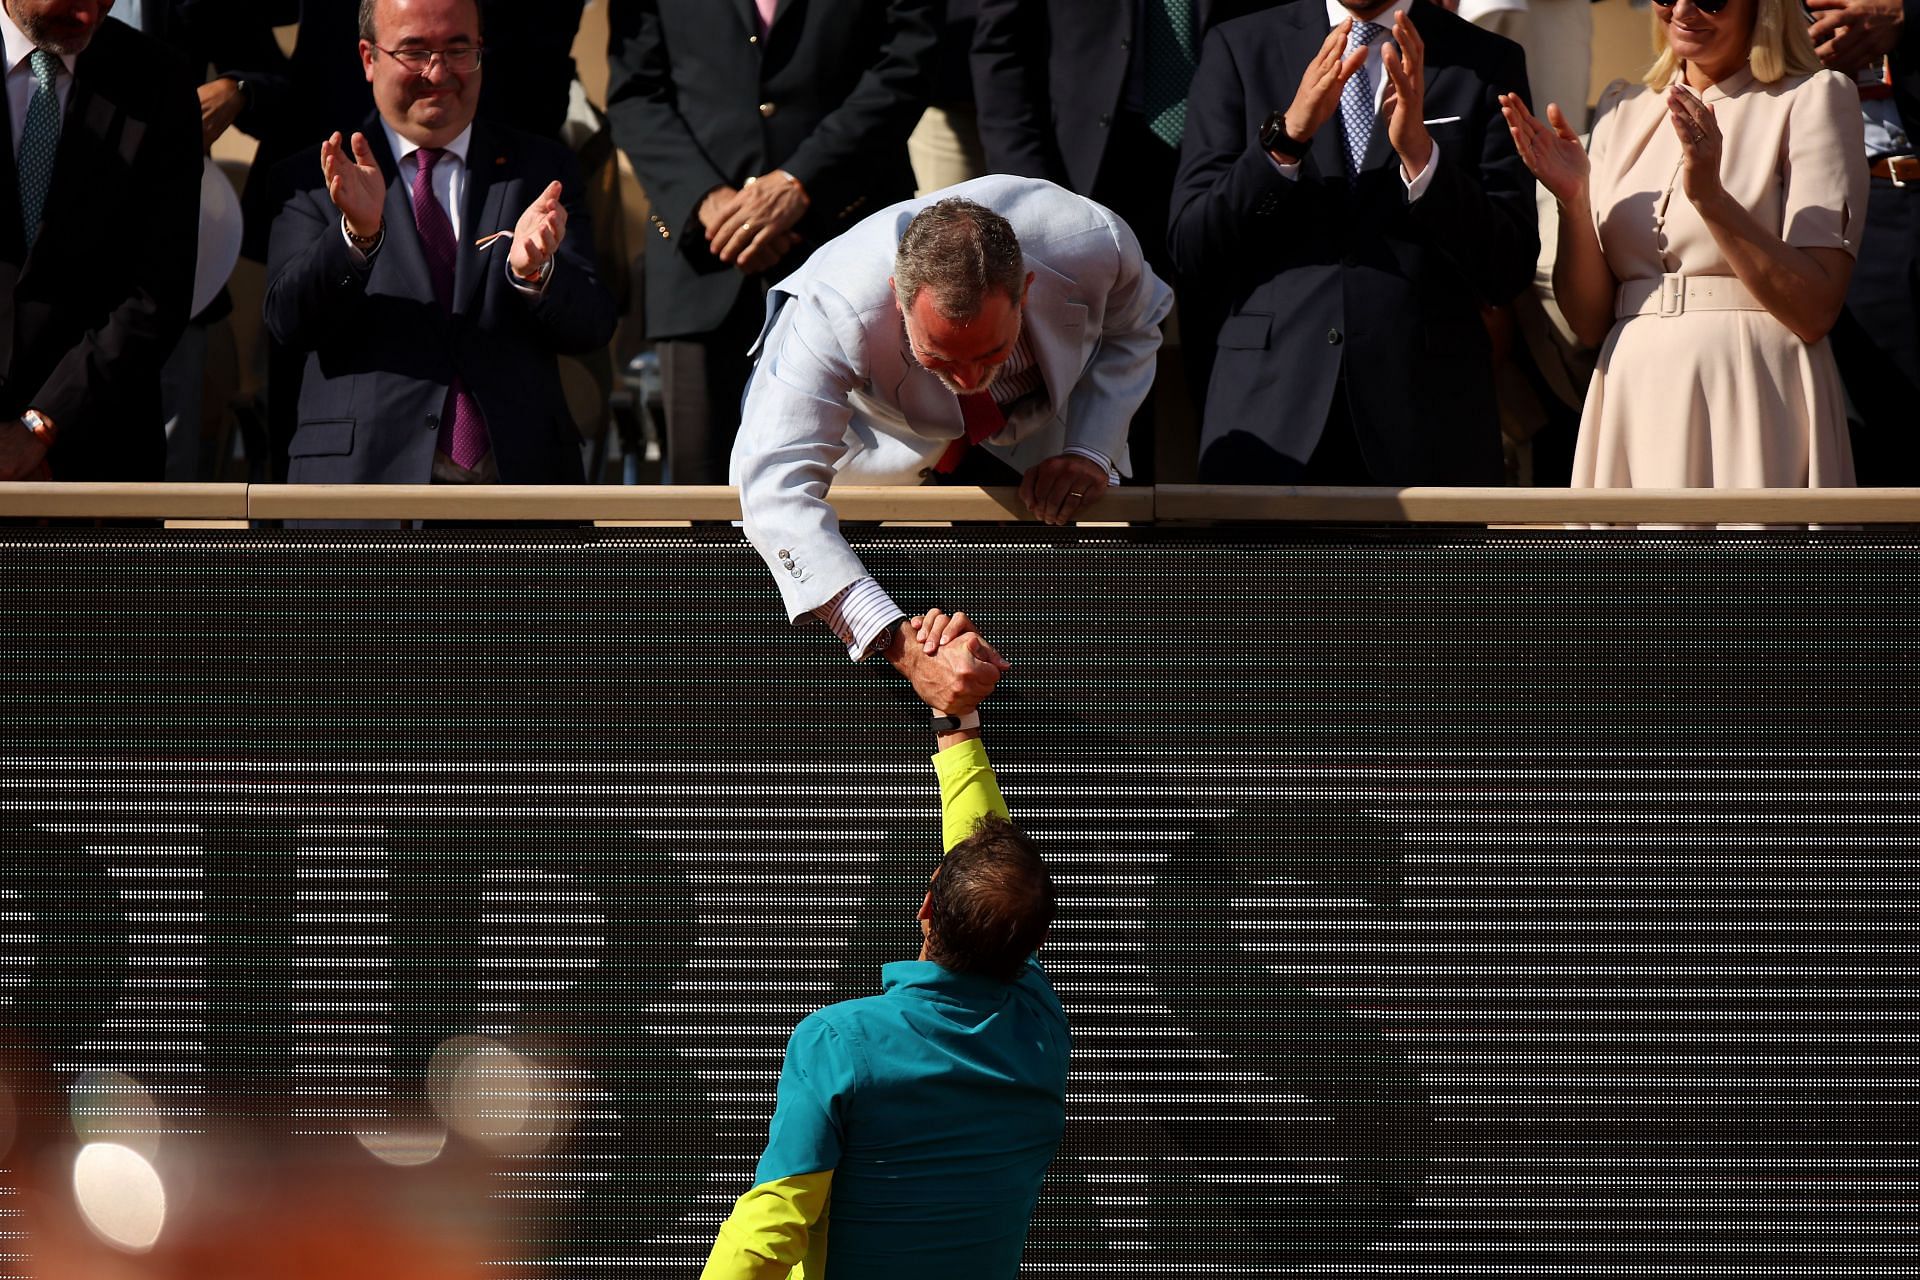 The King congratulates the Spaniard after his 2022 French Open triumph